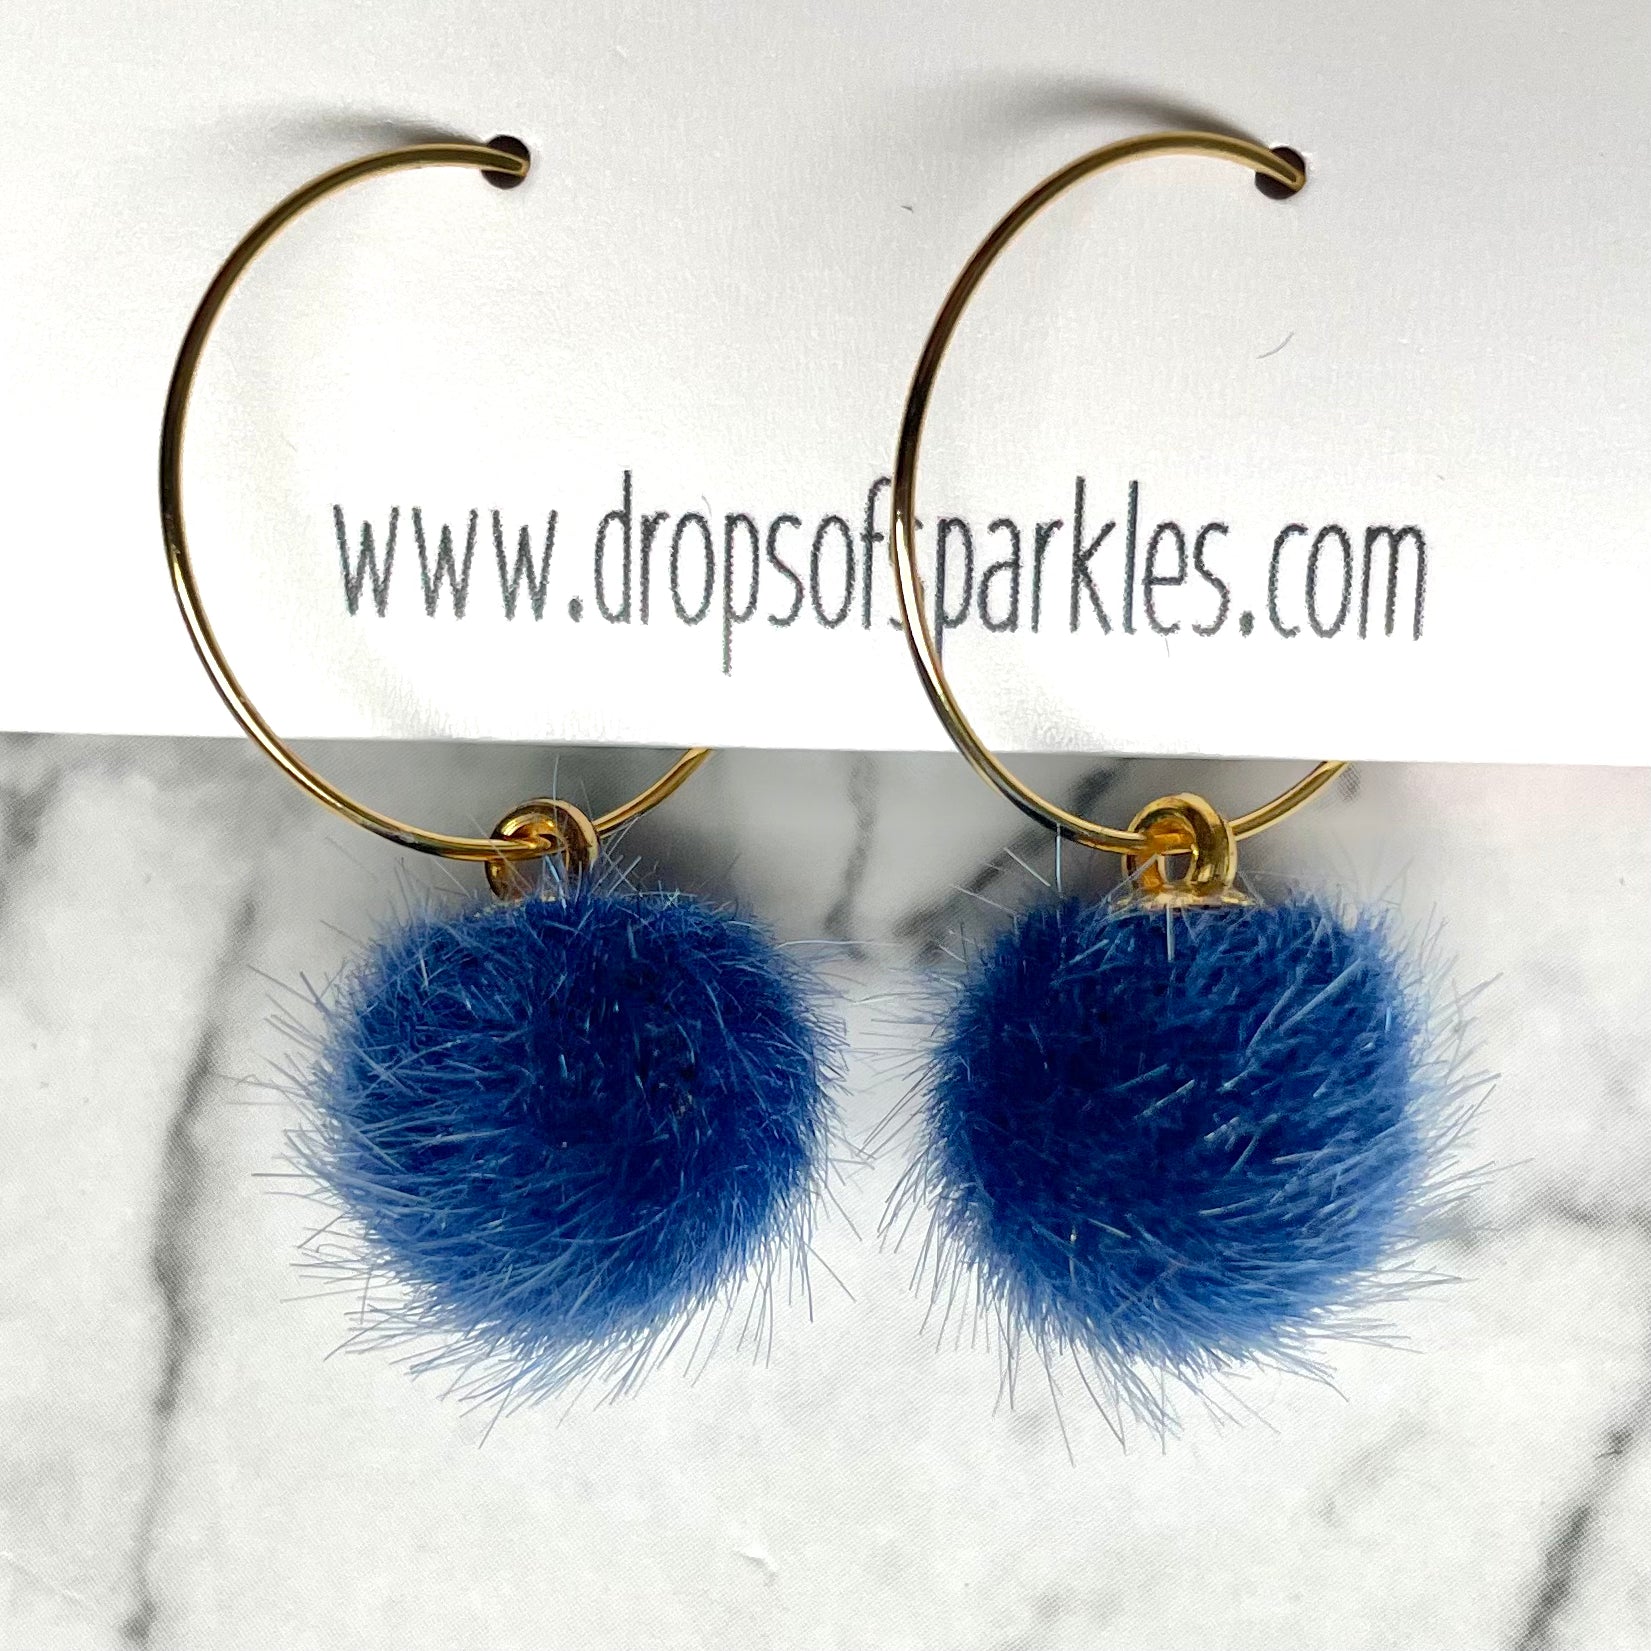 20mm round 24k shiny gold plated  "hoops" with fun little navy blue fuzzy pom poms attached